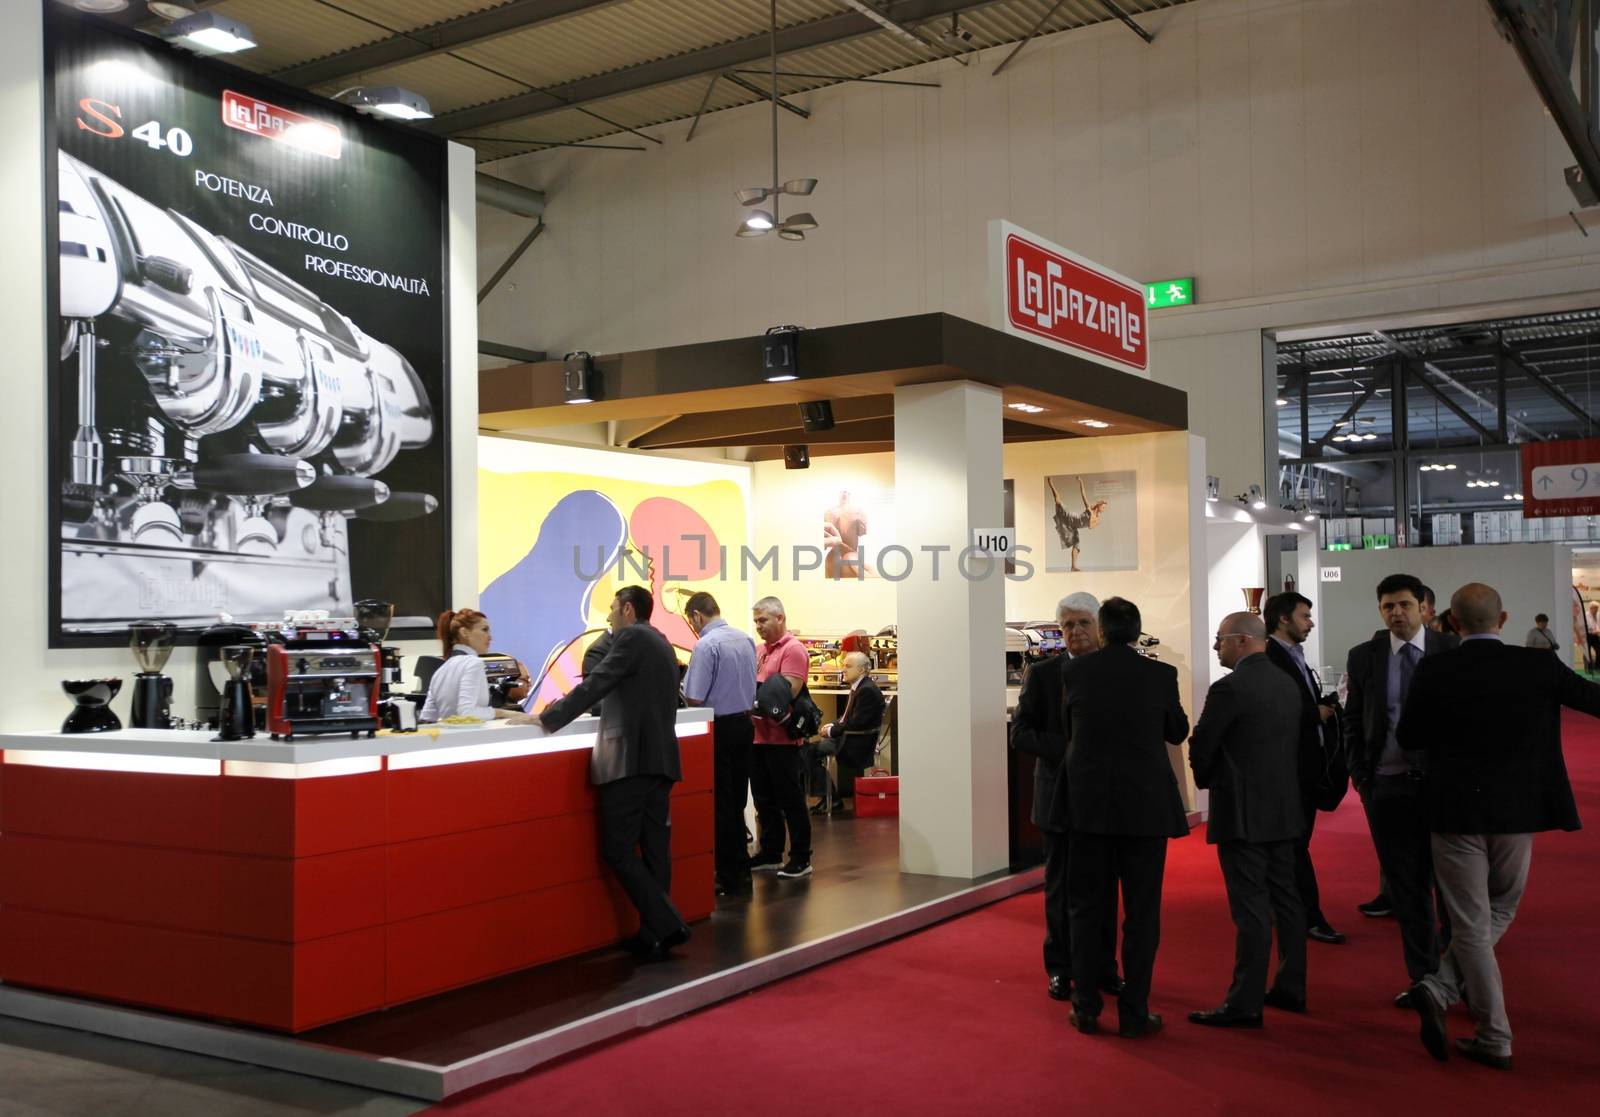 People visit Made in Italy food productions at Tuttofood 2013, World Food Exhibition during Food Week in Milano, Italy.